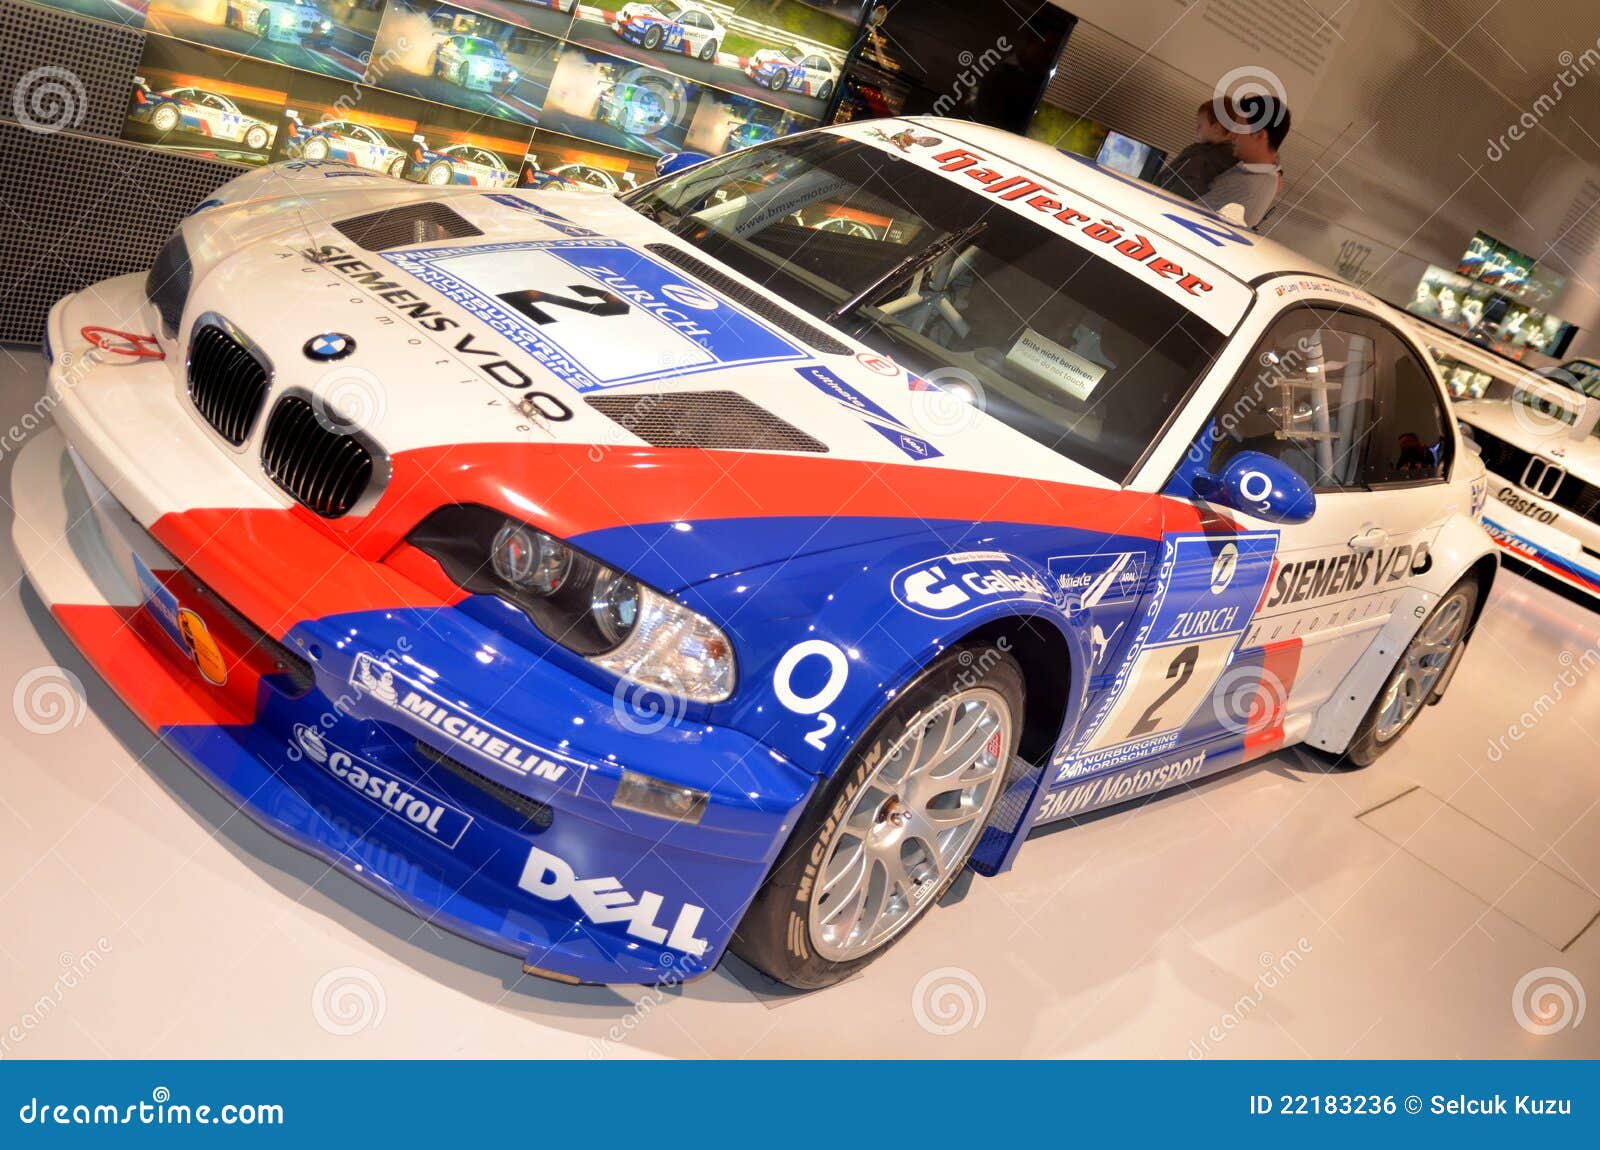 Bmw M3 Gtr 2004 Editorial Photo. Image Of Ring, Automobile - 22183236